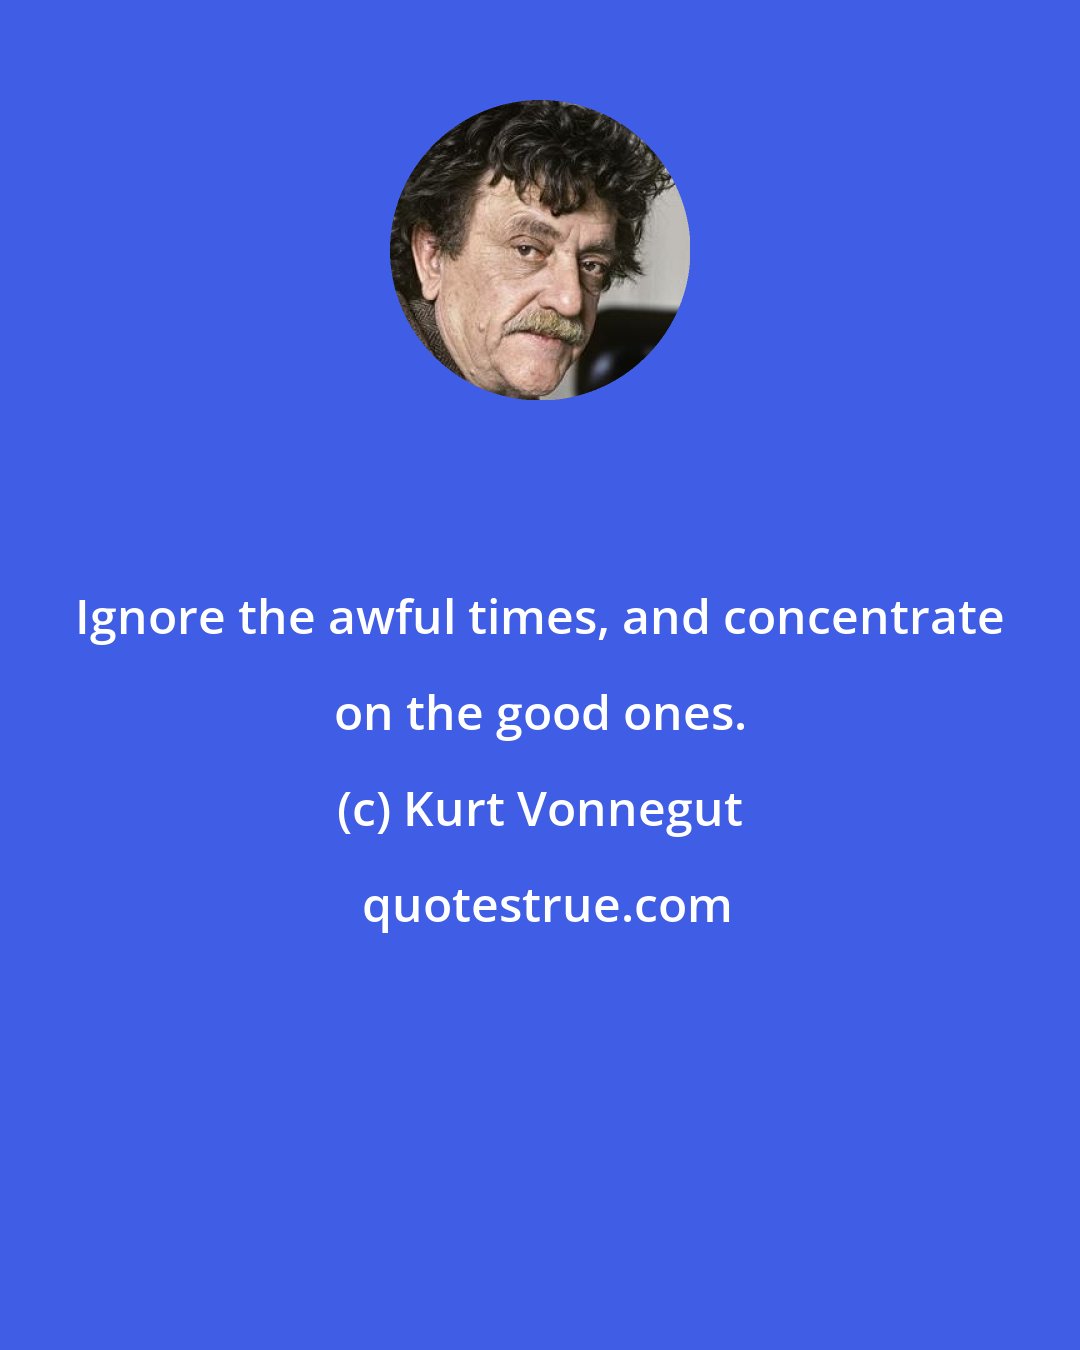 Kurt Vonnegut: Ignore the awful times, and concentrate on the good ones.